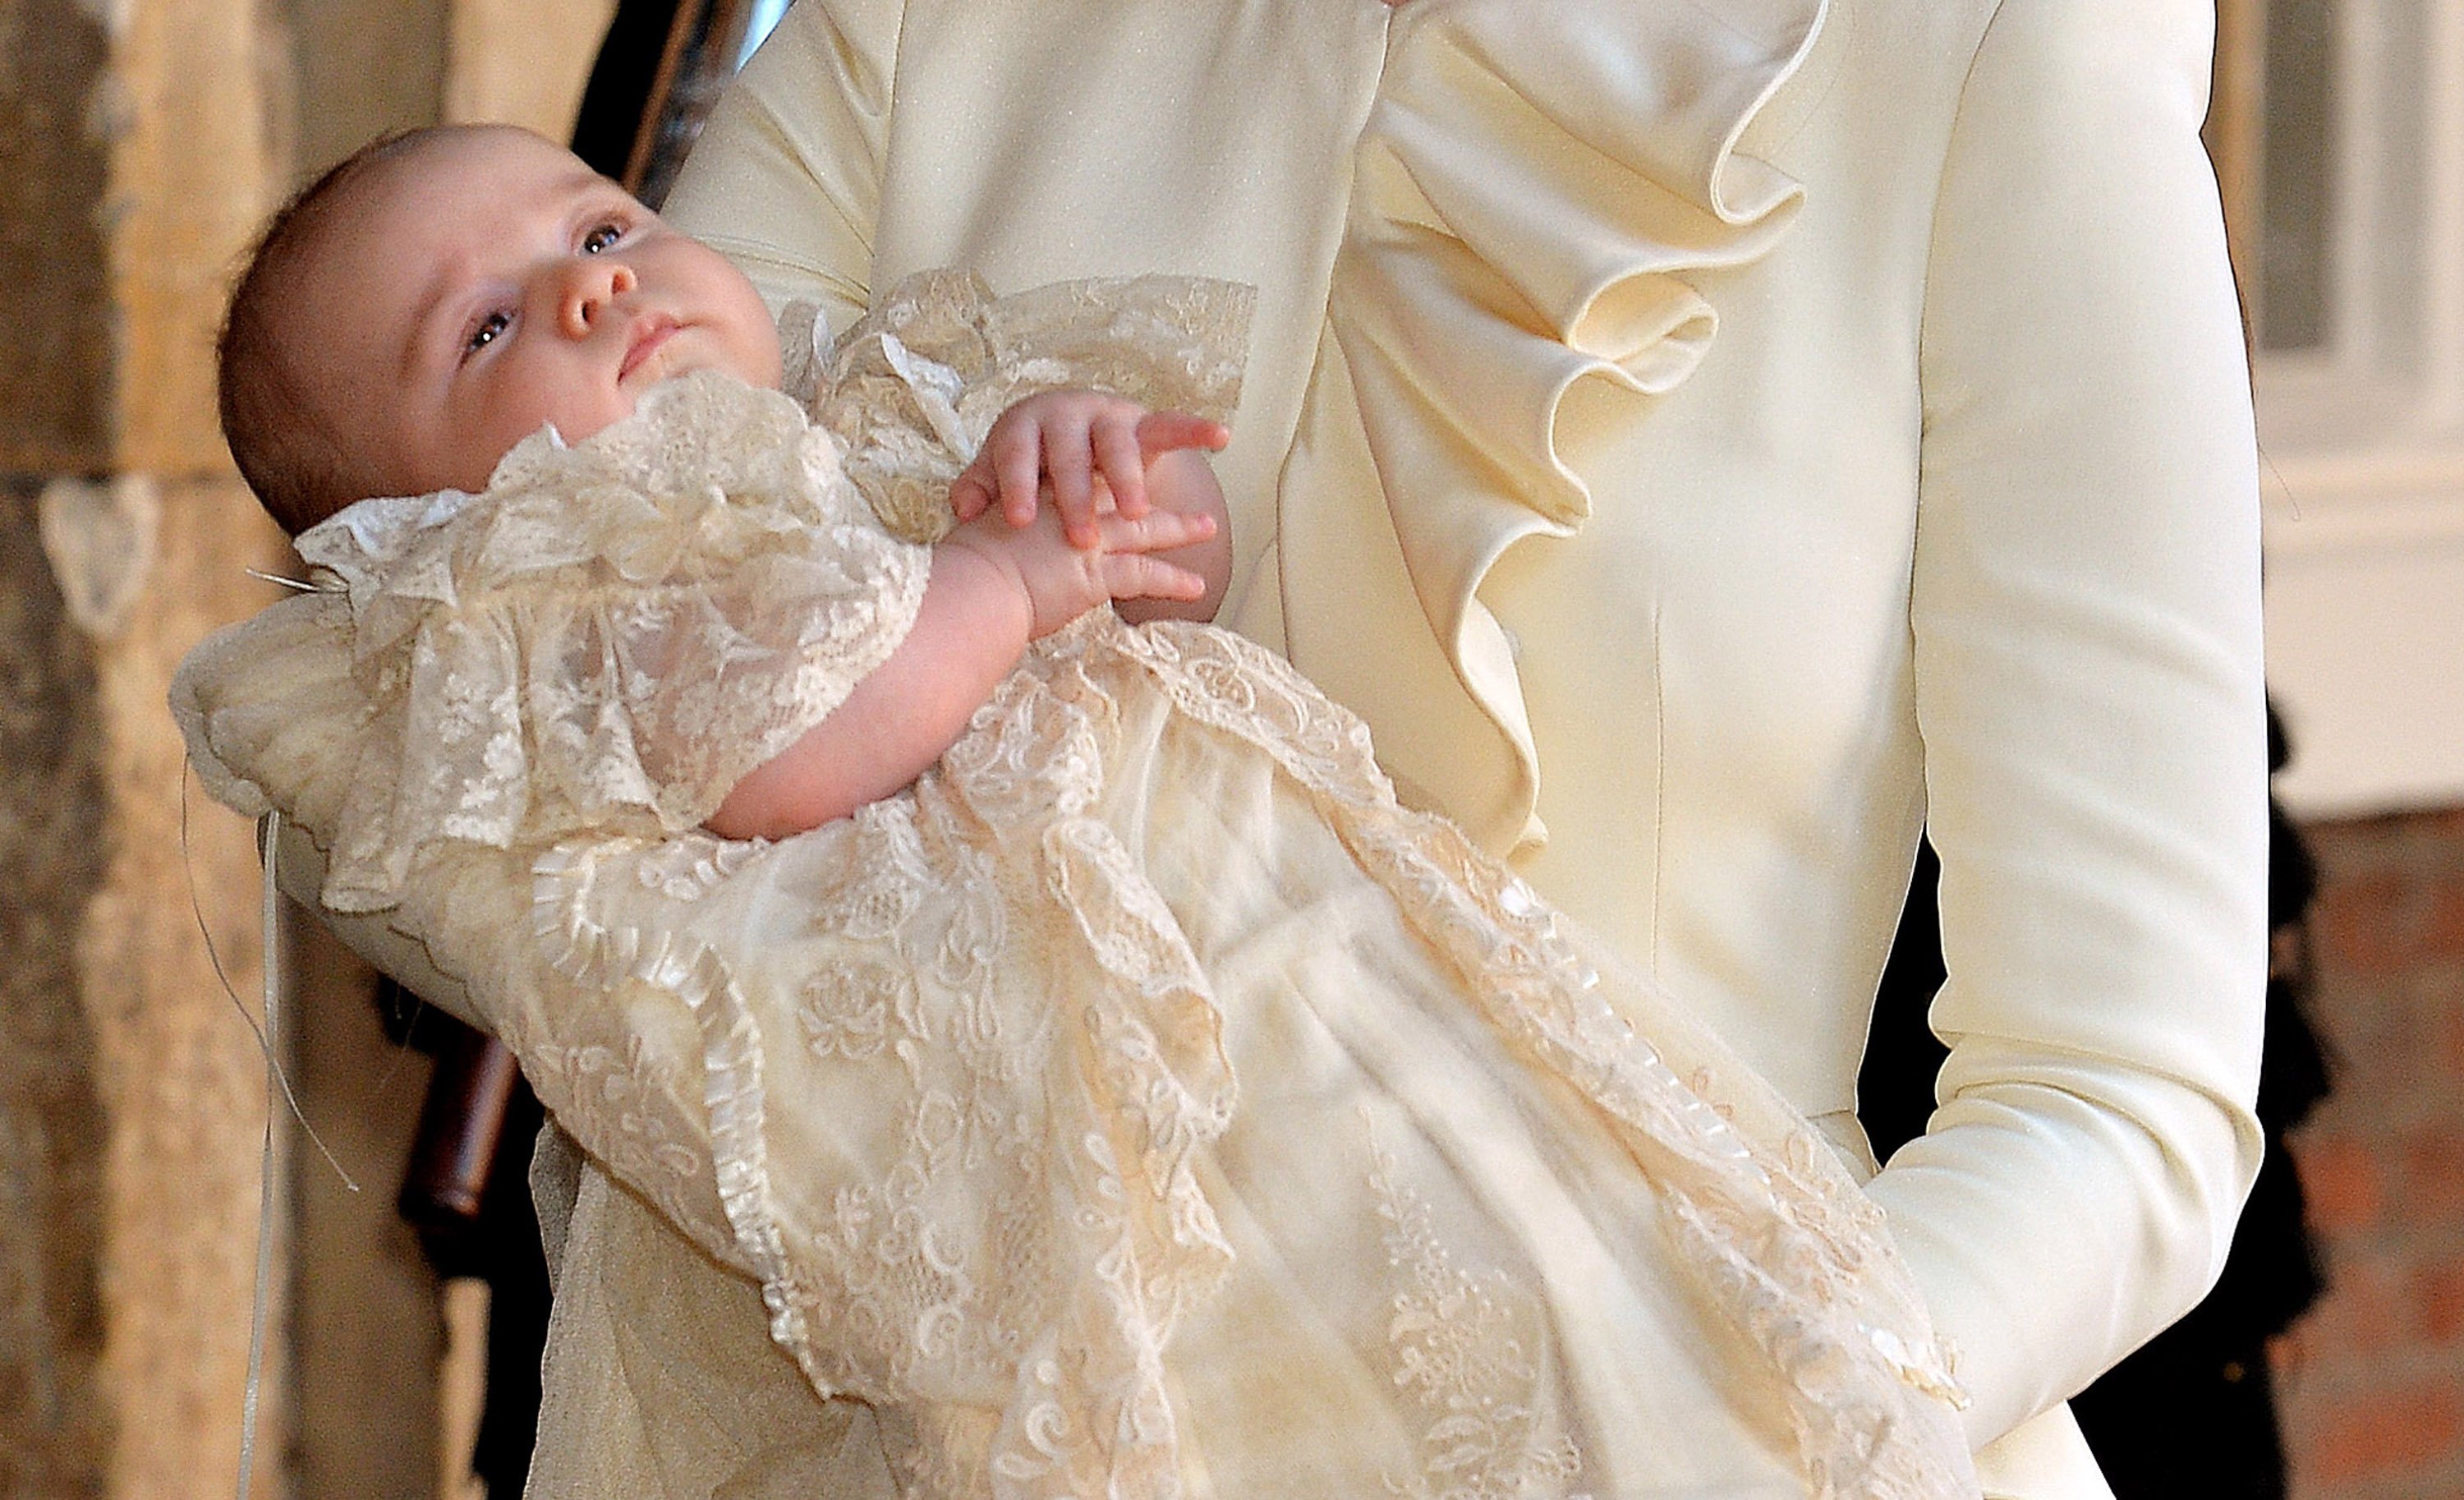 Catherine, Duchess of Cambridge carries her son Prince George Of Cambridge after his christening on October 23, 2013 in London, England. | Photo: Getty Images